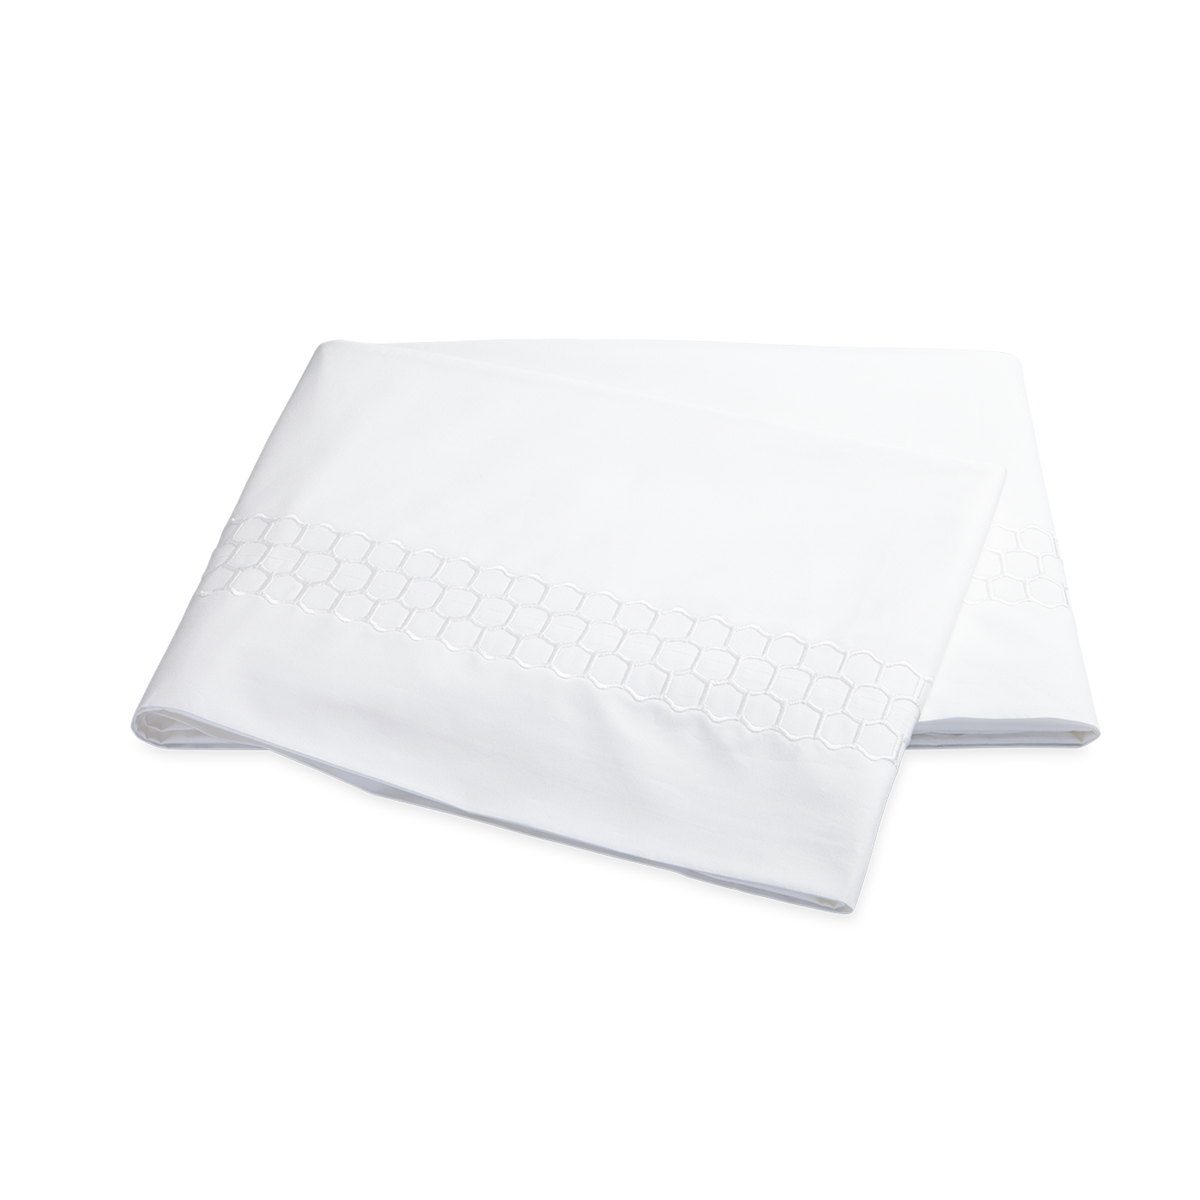 Clear Image of Matouk Liana Bedding Flat Sheet in White Color